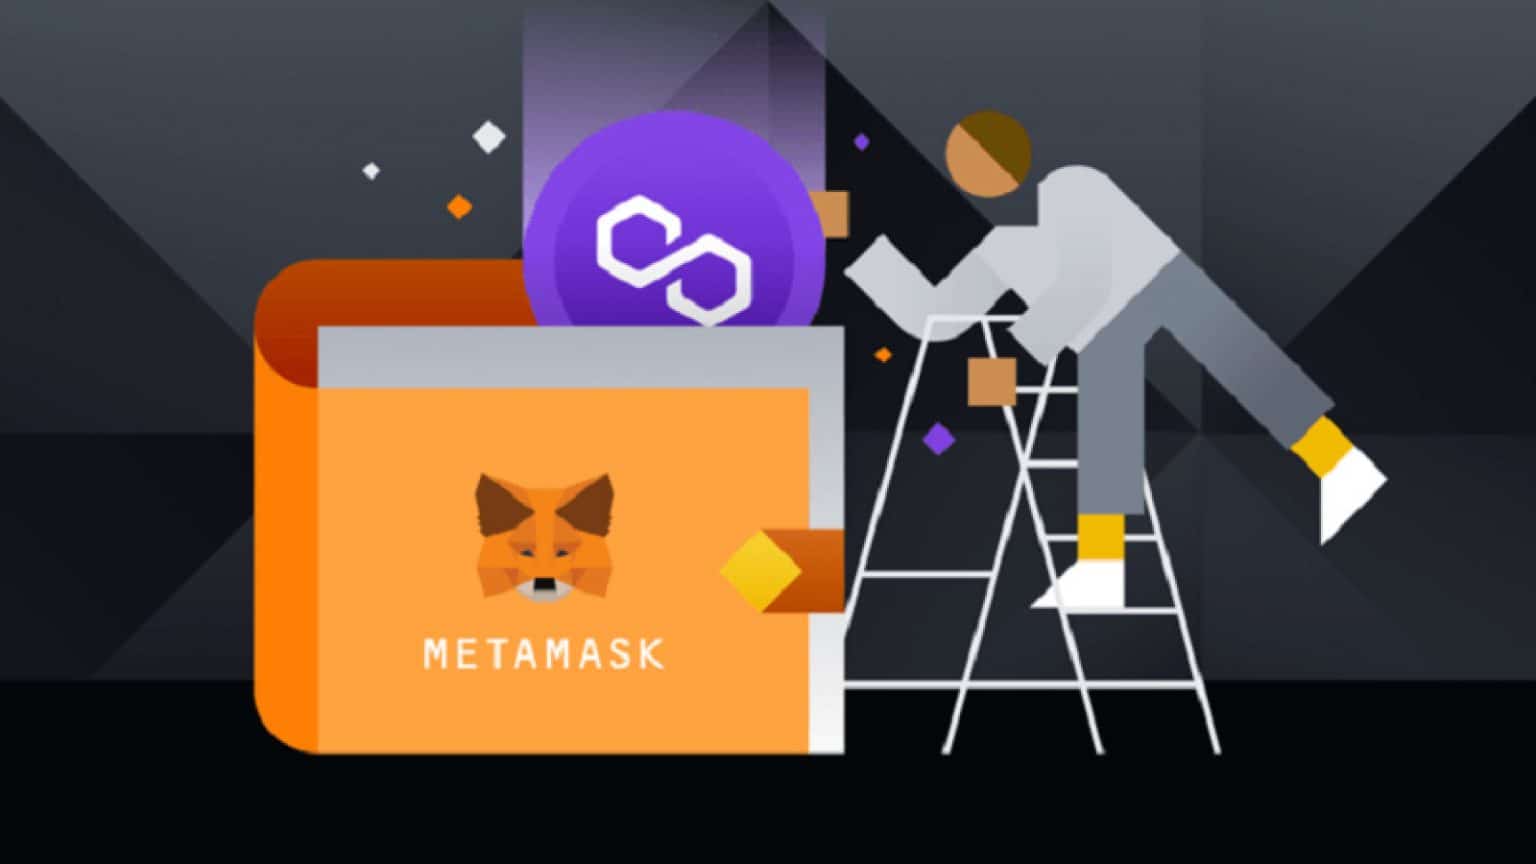 can i store bitcoin on metamask